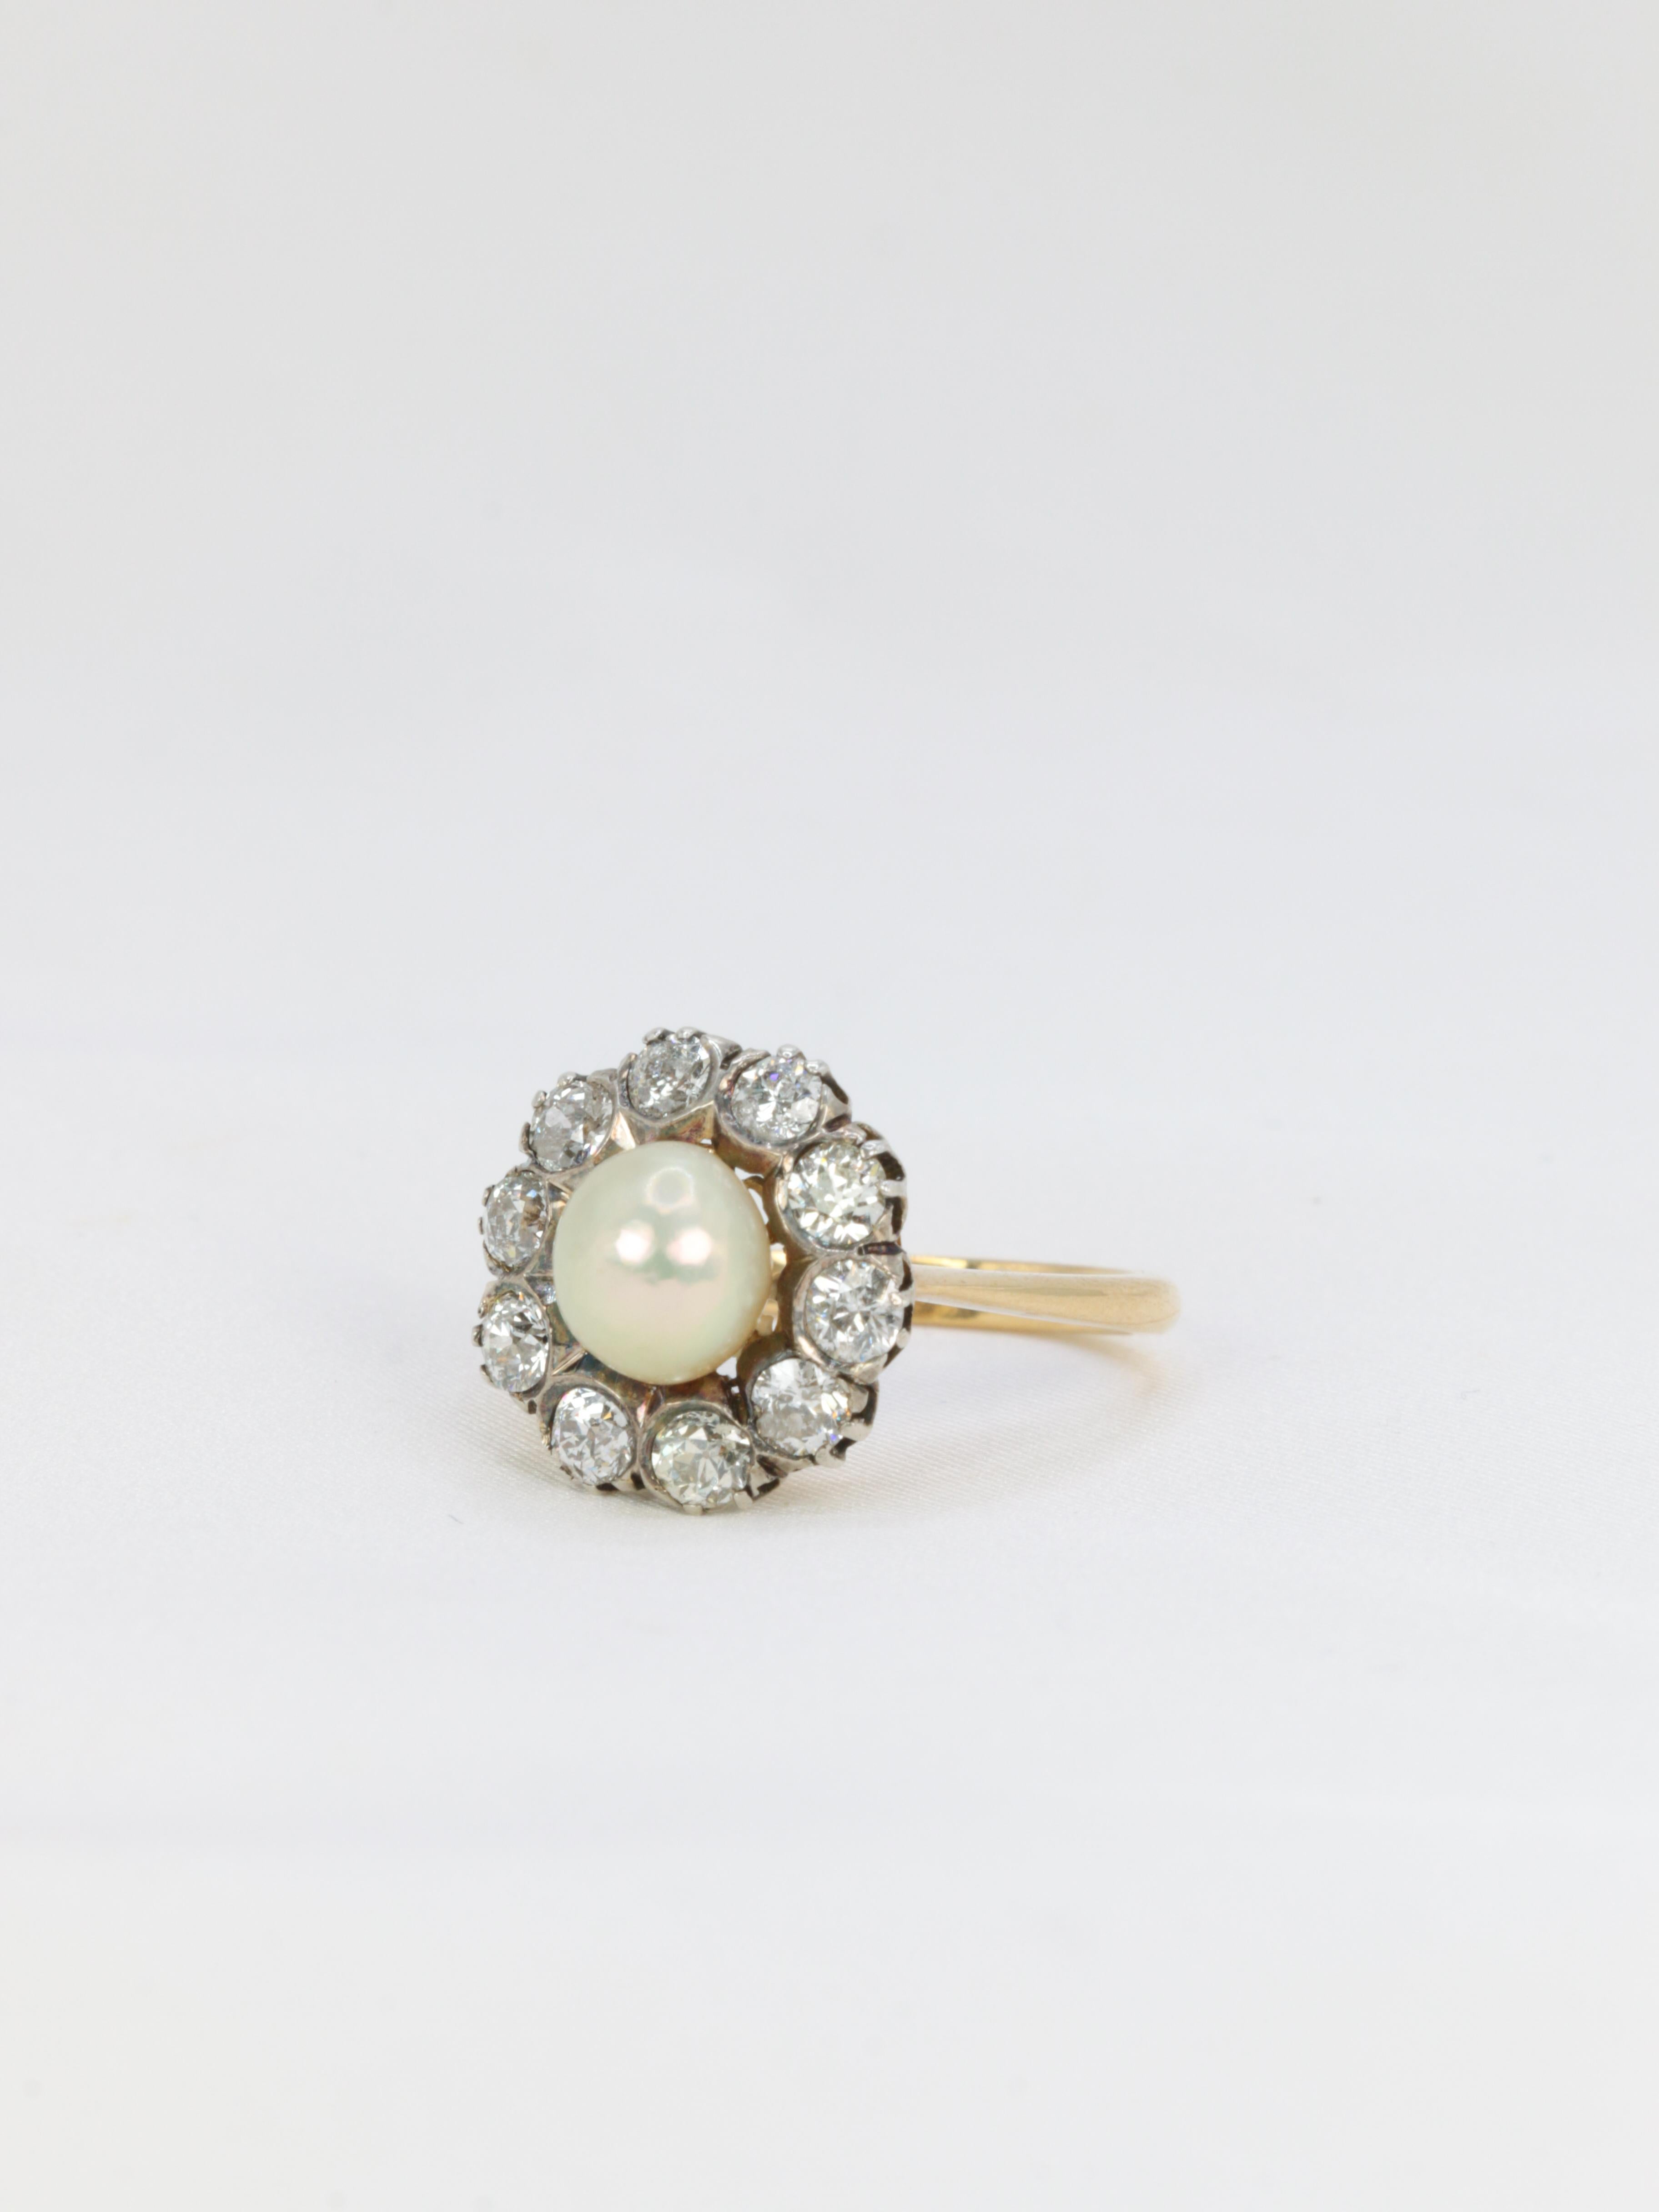 Edwardian Gold and Silver Cluster Ring with Old Mine Cut Diamonds and a Natural For Sale 3